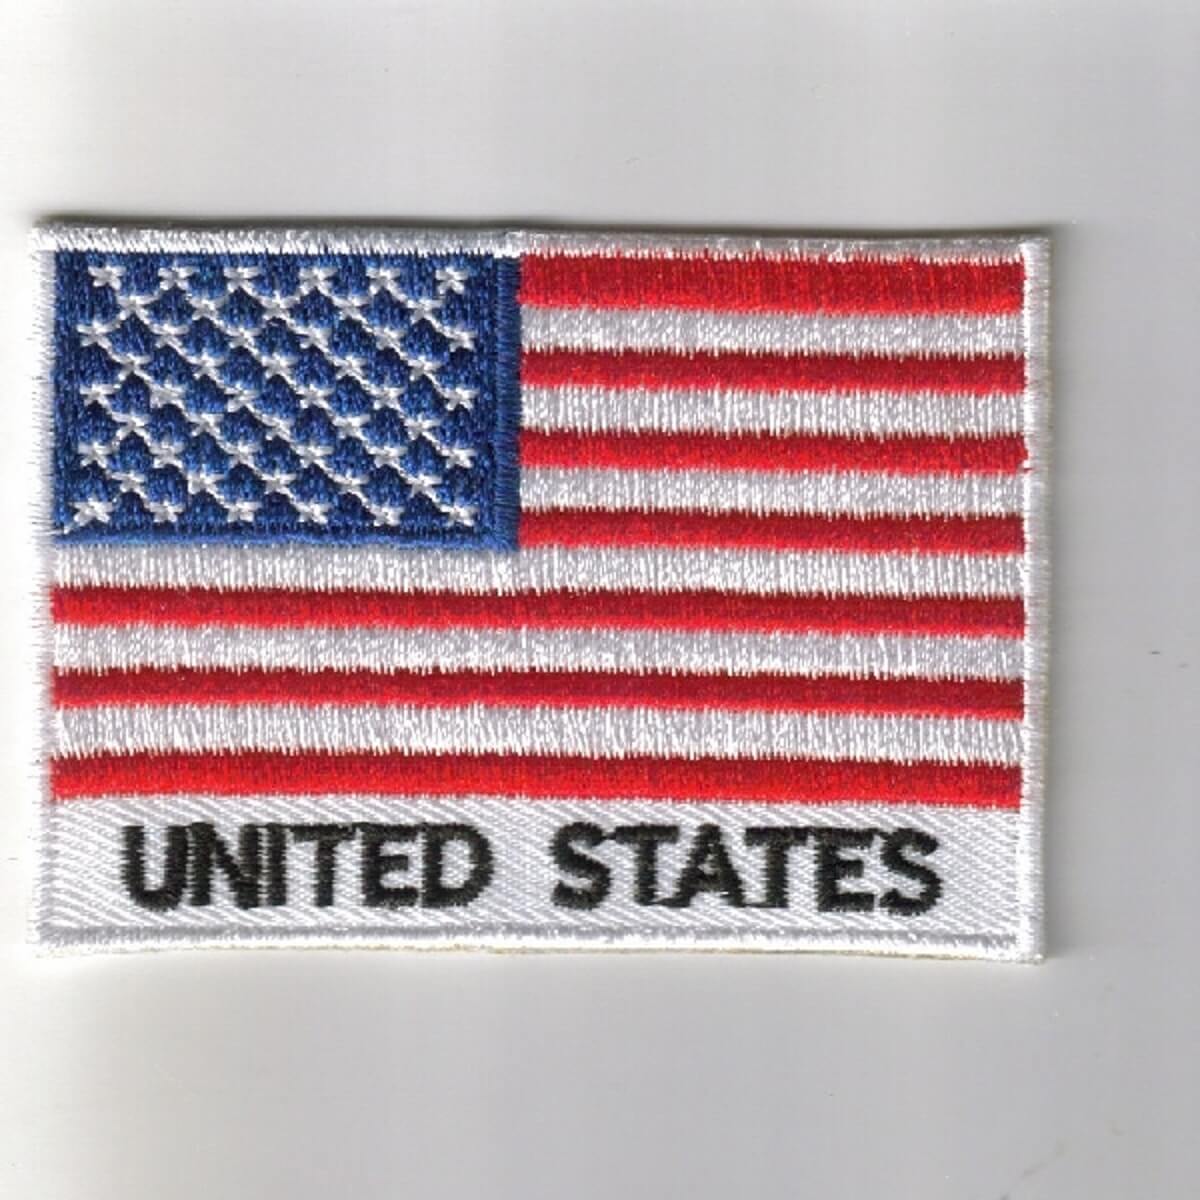 Patches / Badges / Flags